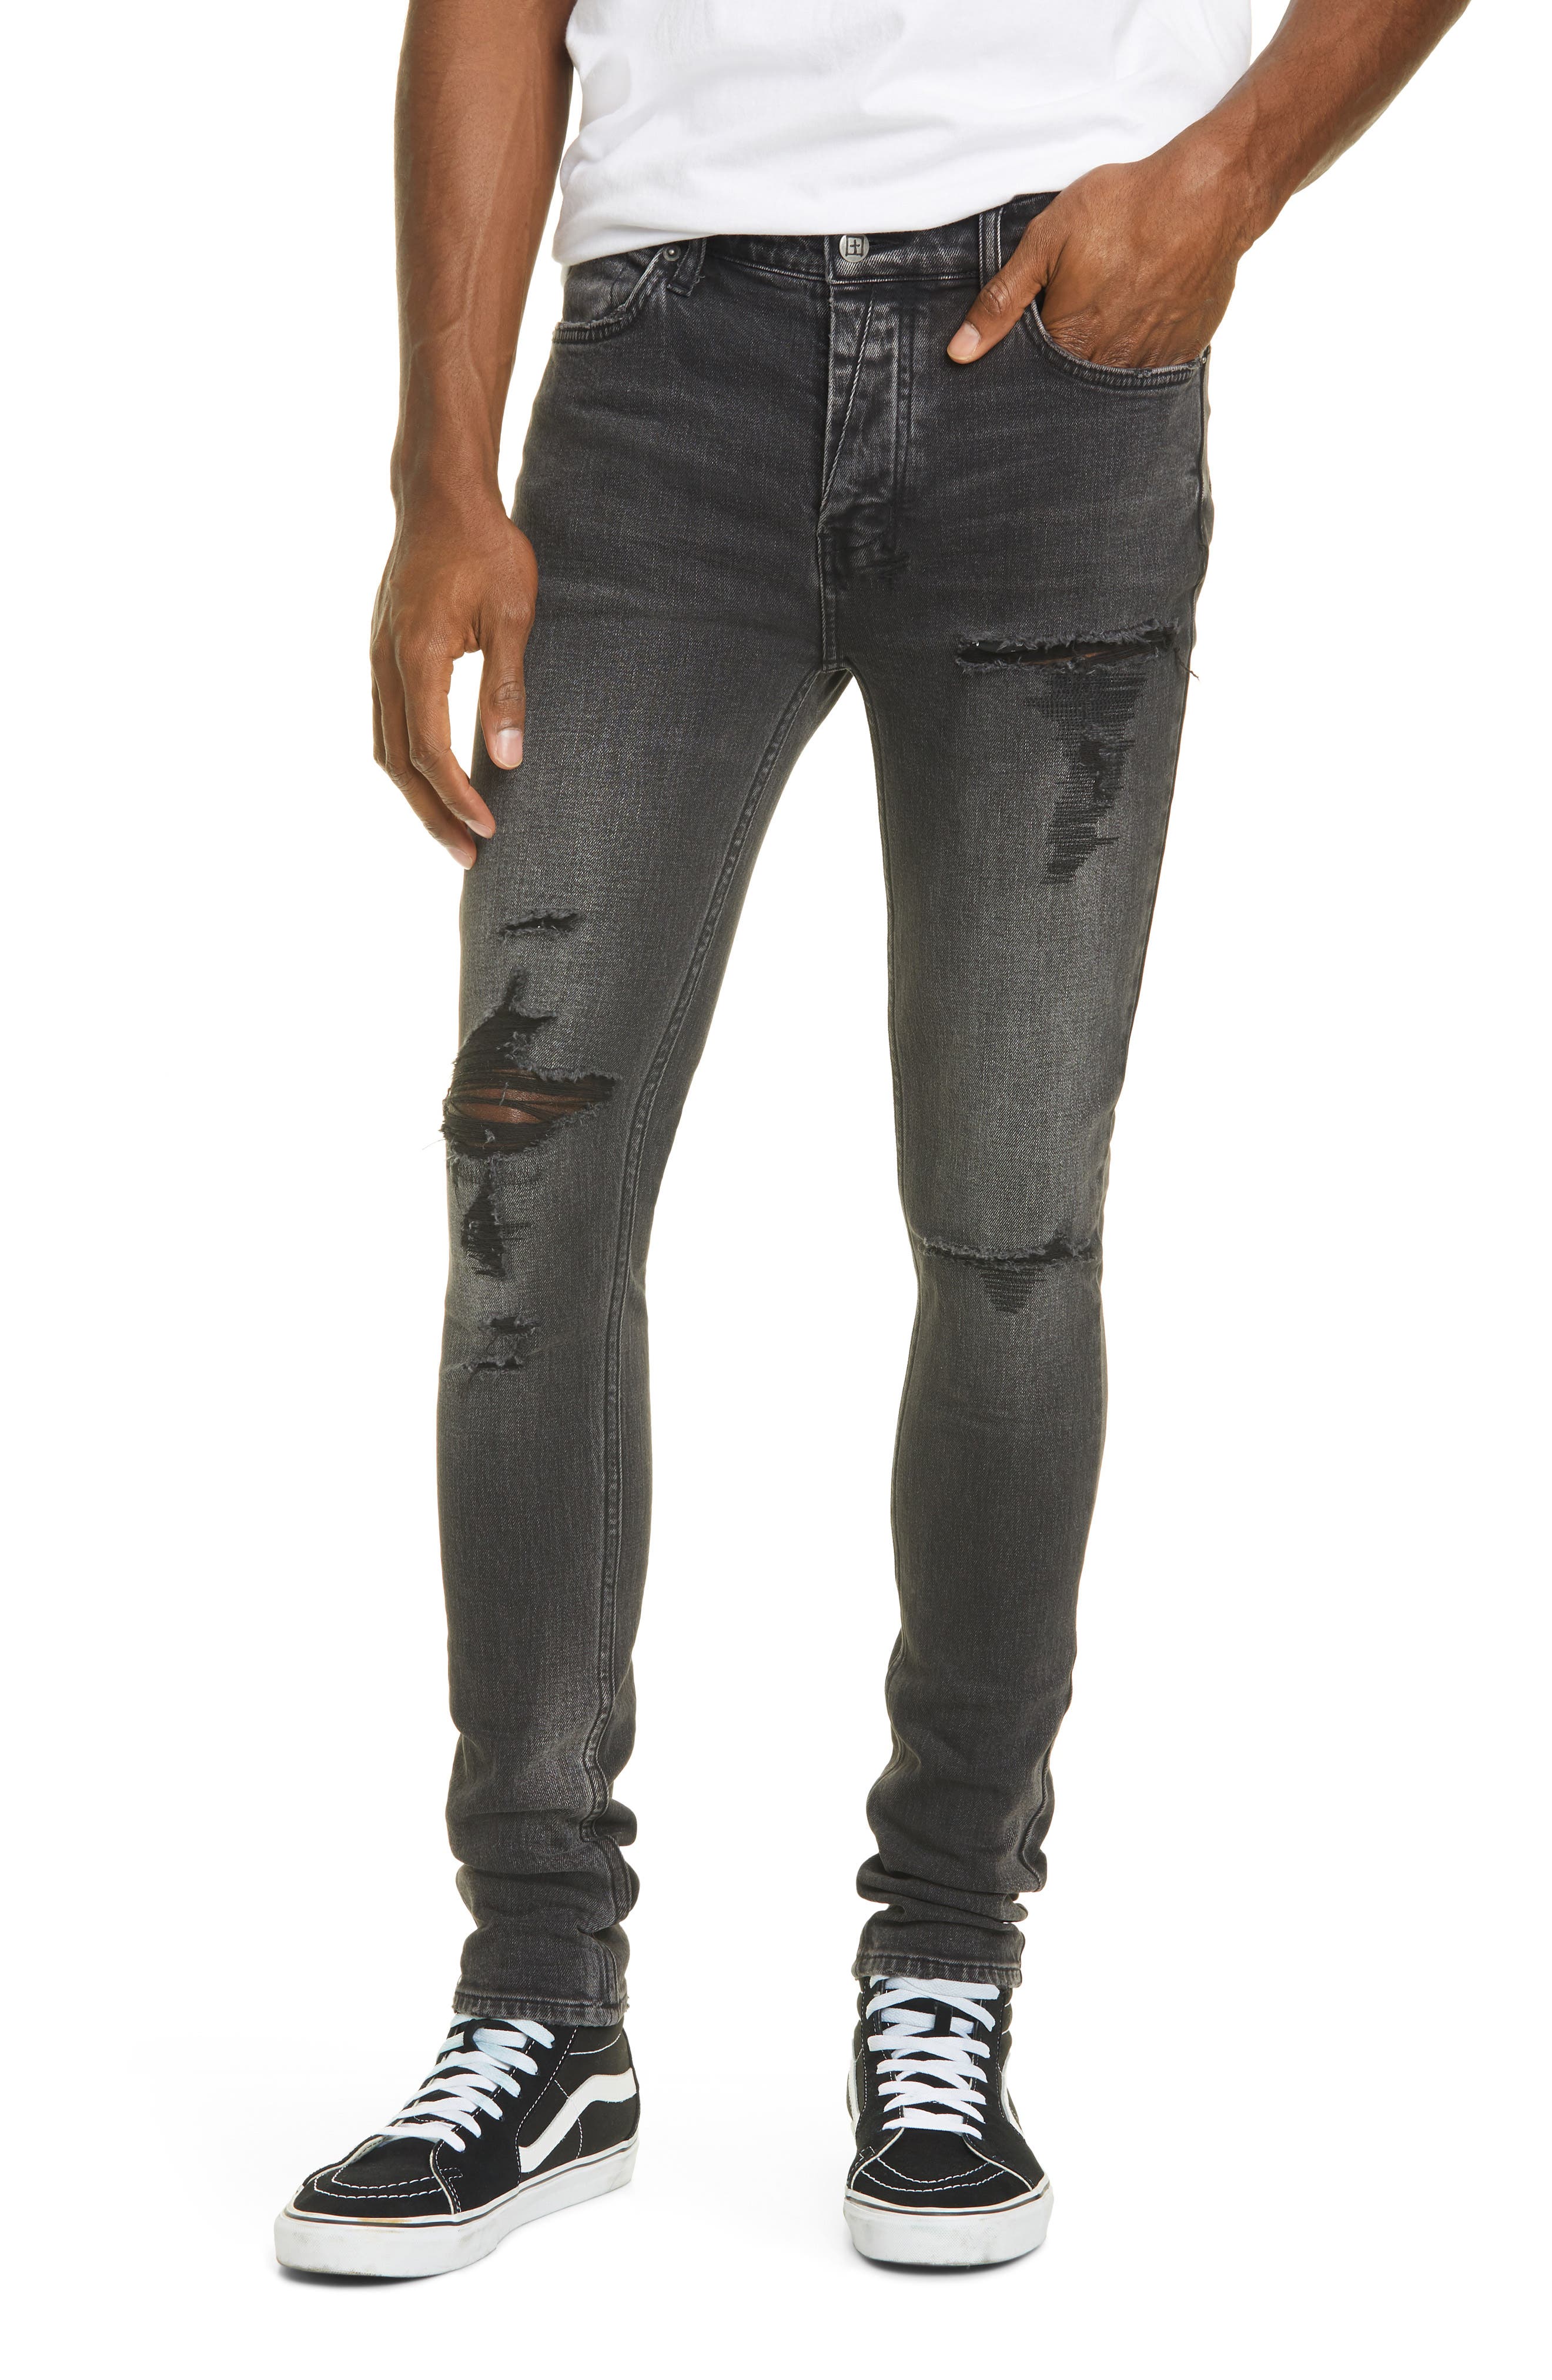 rock revival jean outfit